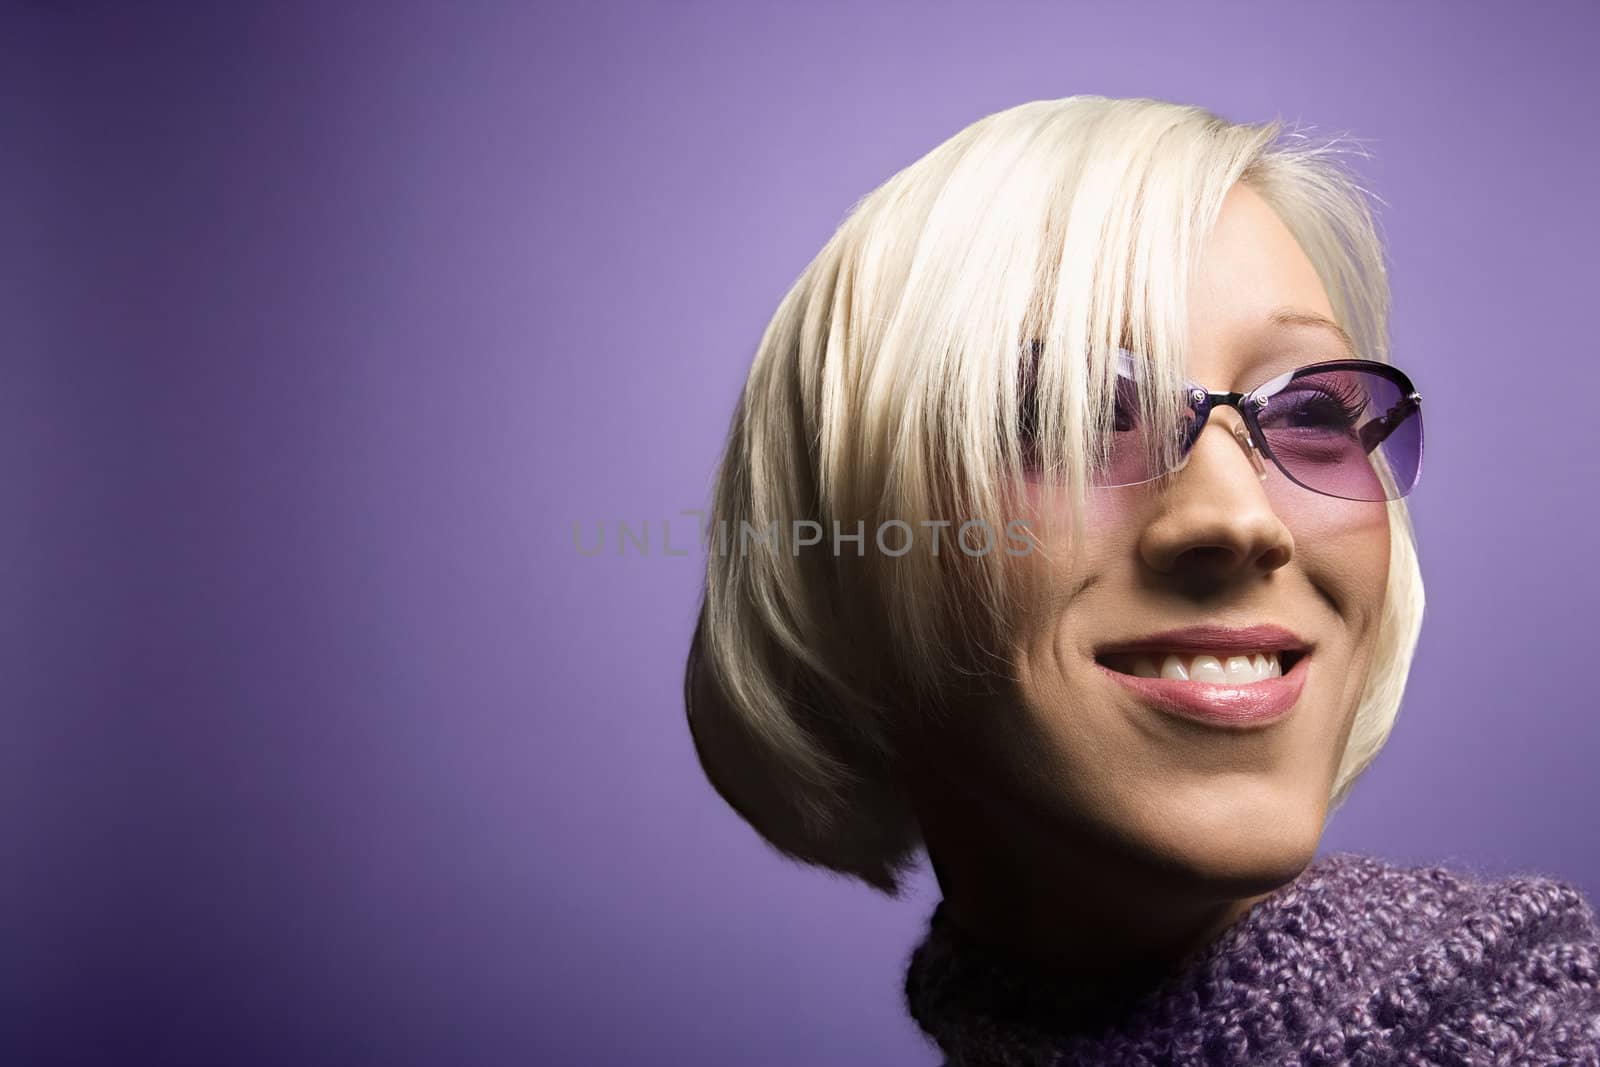 Portrait of smiling young adult Caucasian blond woman on purple background wearing sunglasses and scarf.